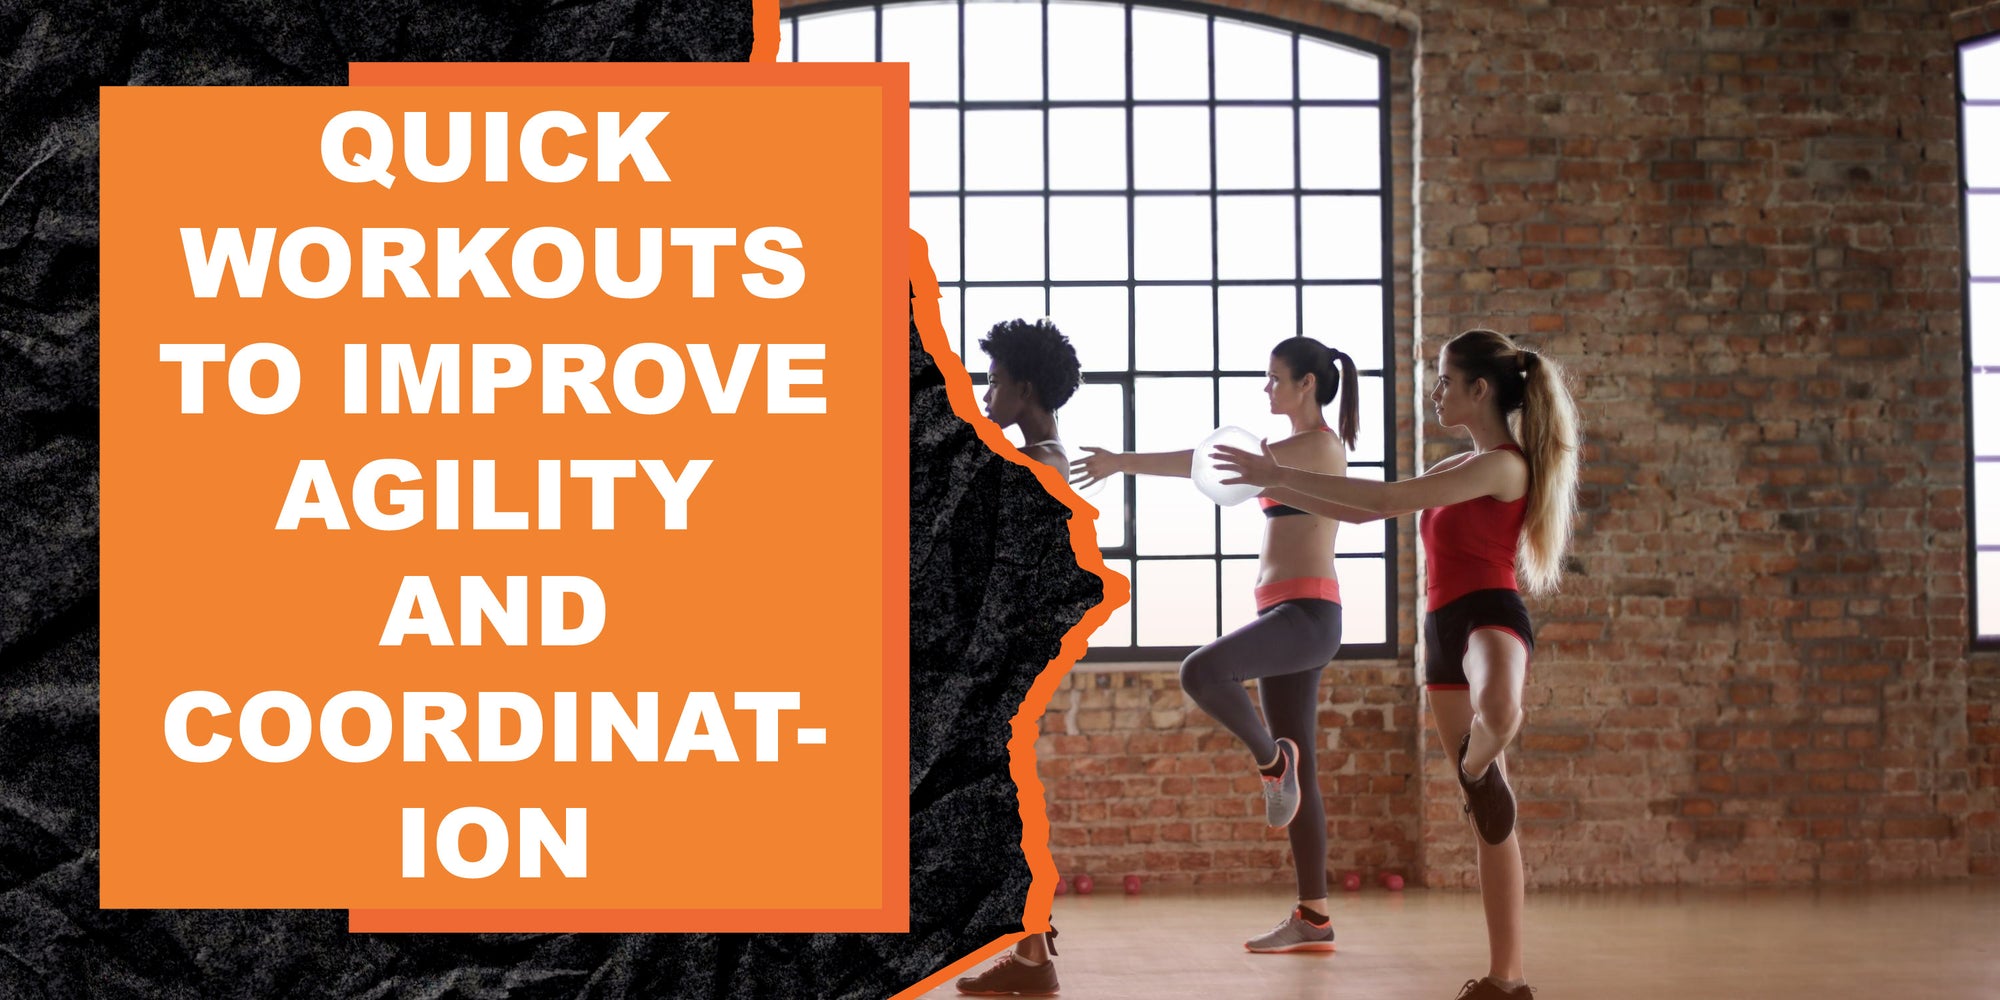 Quick Workouts to Improve Agility and Coordination